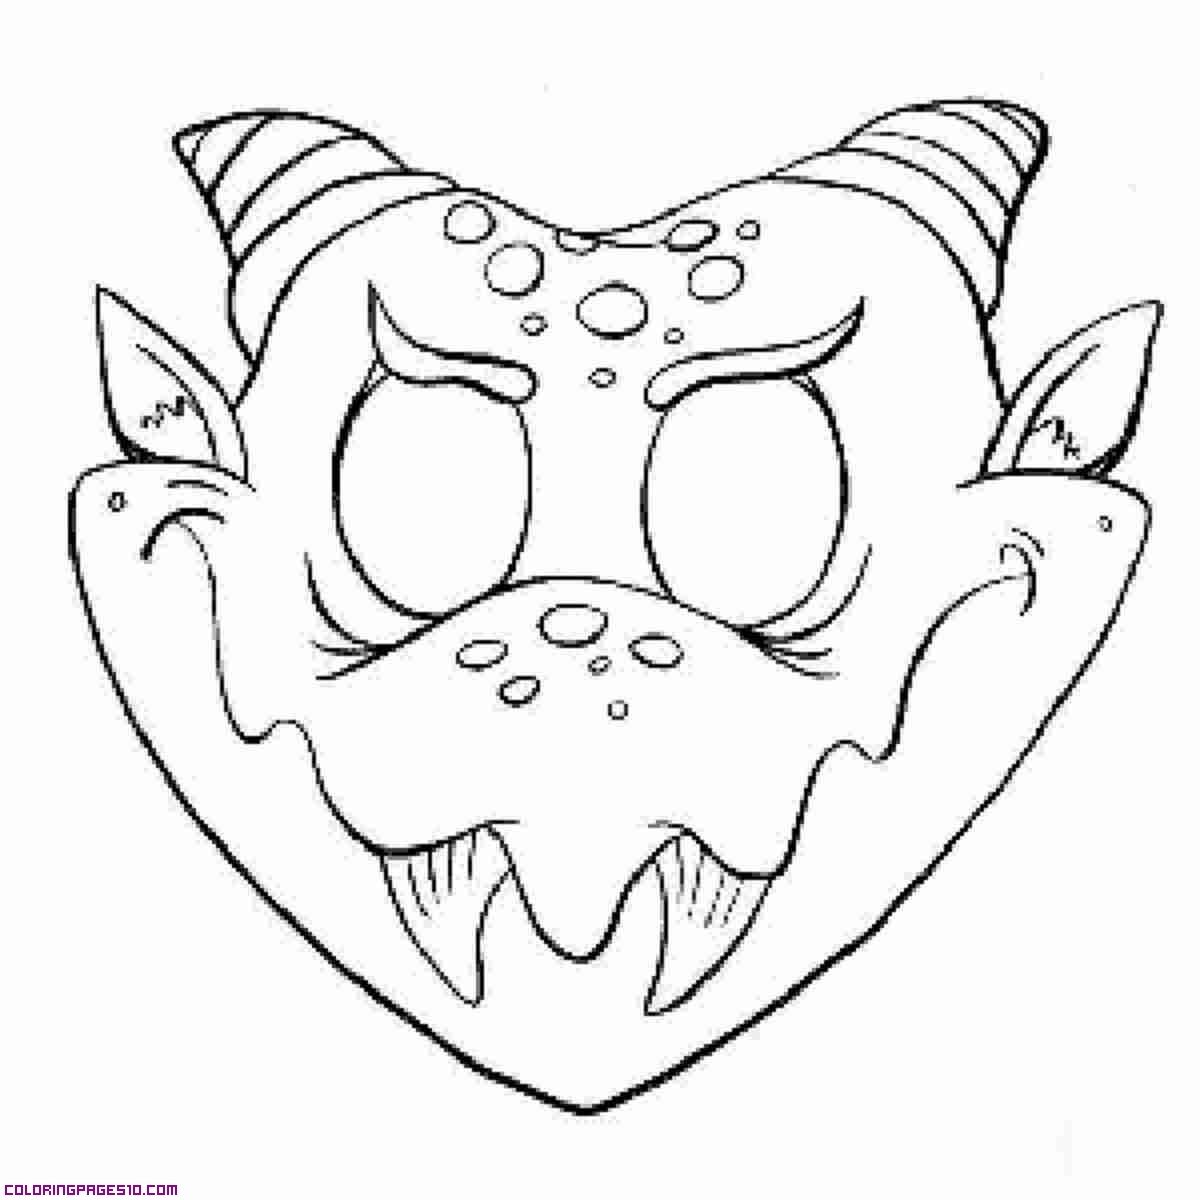 Halloween Scary Masks Coloring Pages - Coloring Home